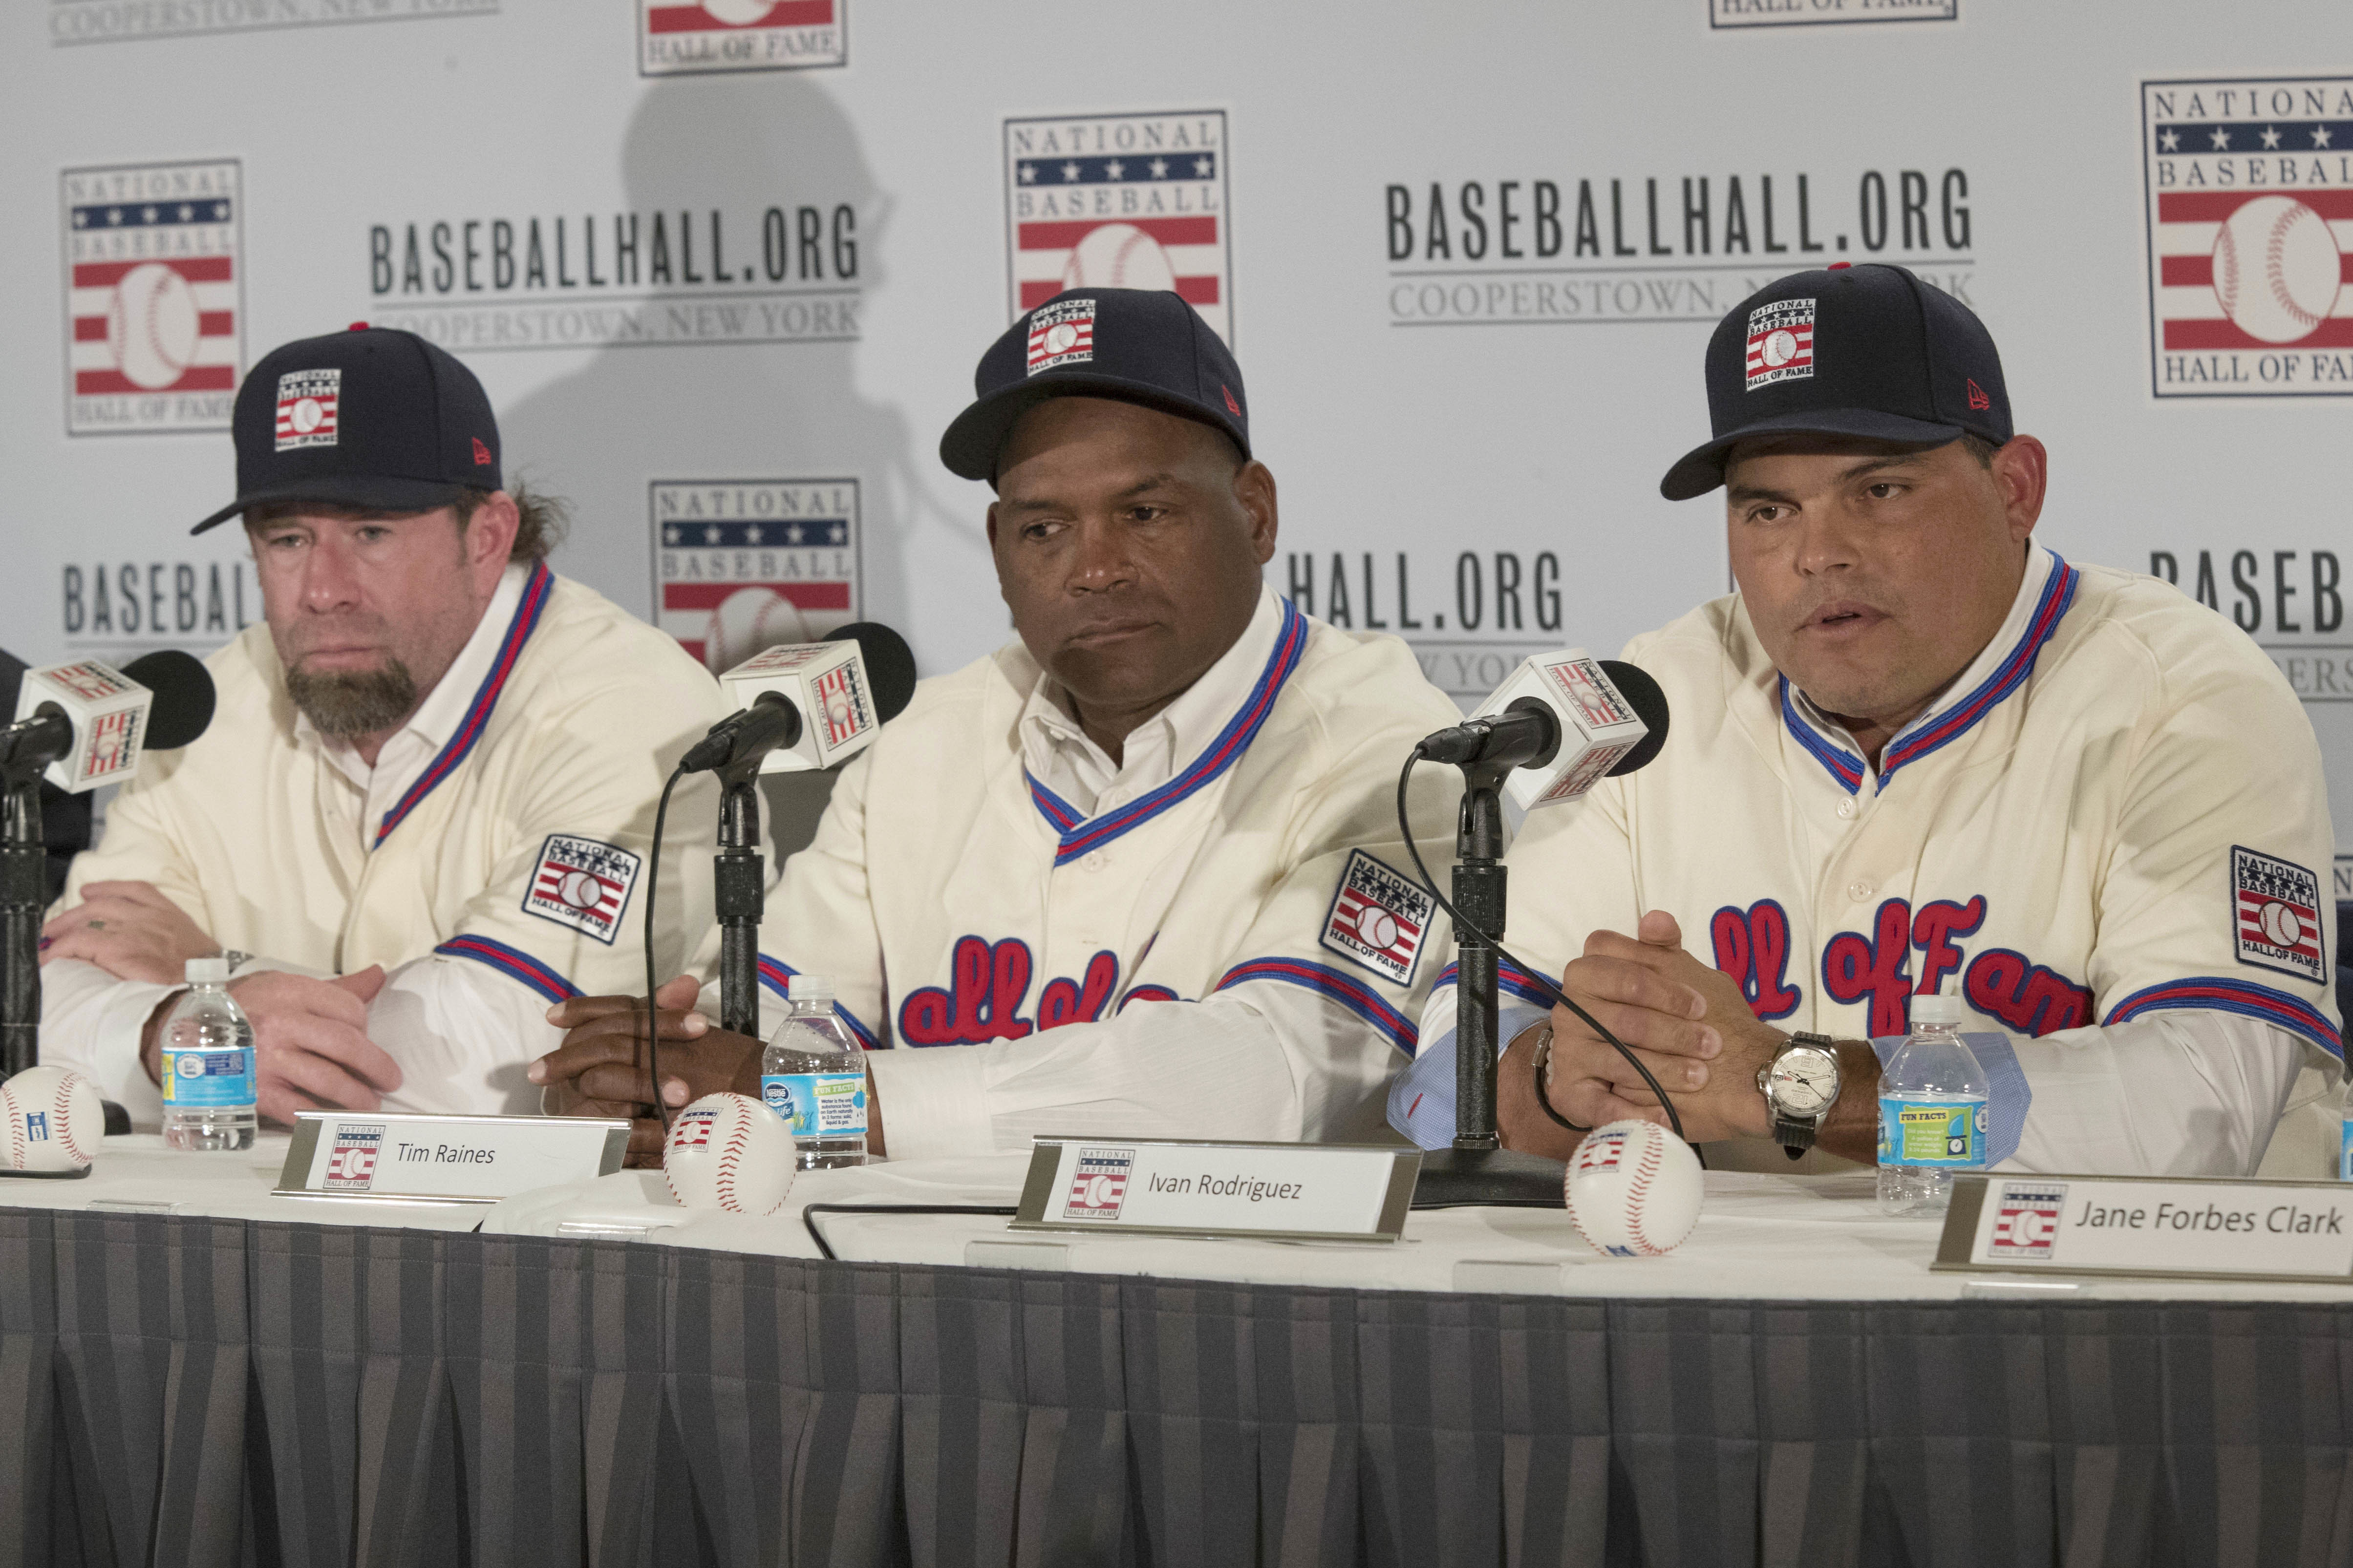 Newly elected baseball Hall of Fame inductees Jeff Bagwell, left, Tim Raines, center, and Ivan Rodriguez, take part in a news conference, Thursday, Jan. 19, 2017, in New York.